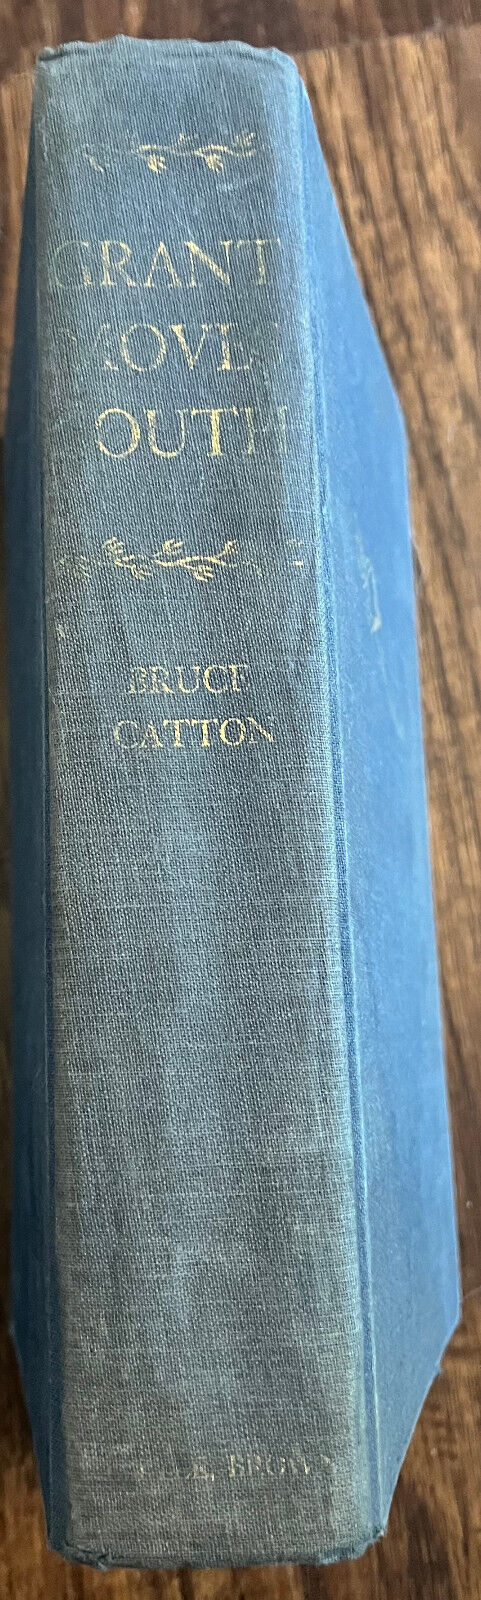 GRANT MOVES SOUTH by Bruce Catton 1960 HC